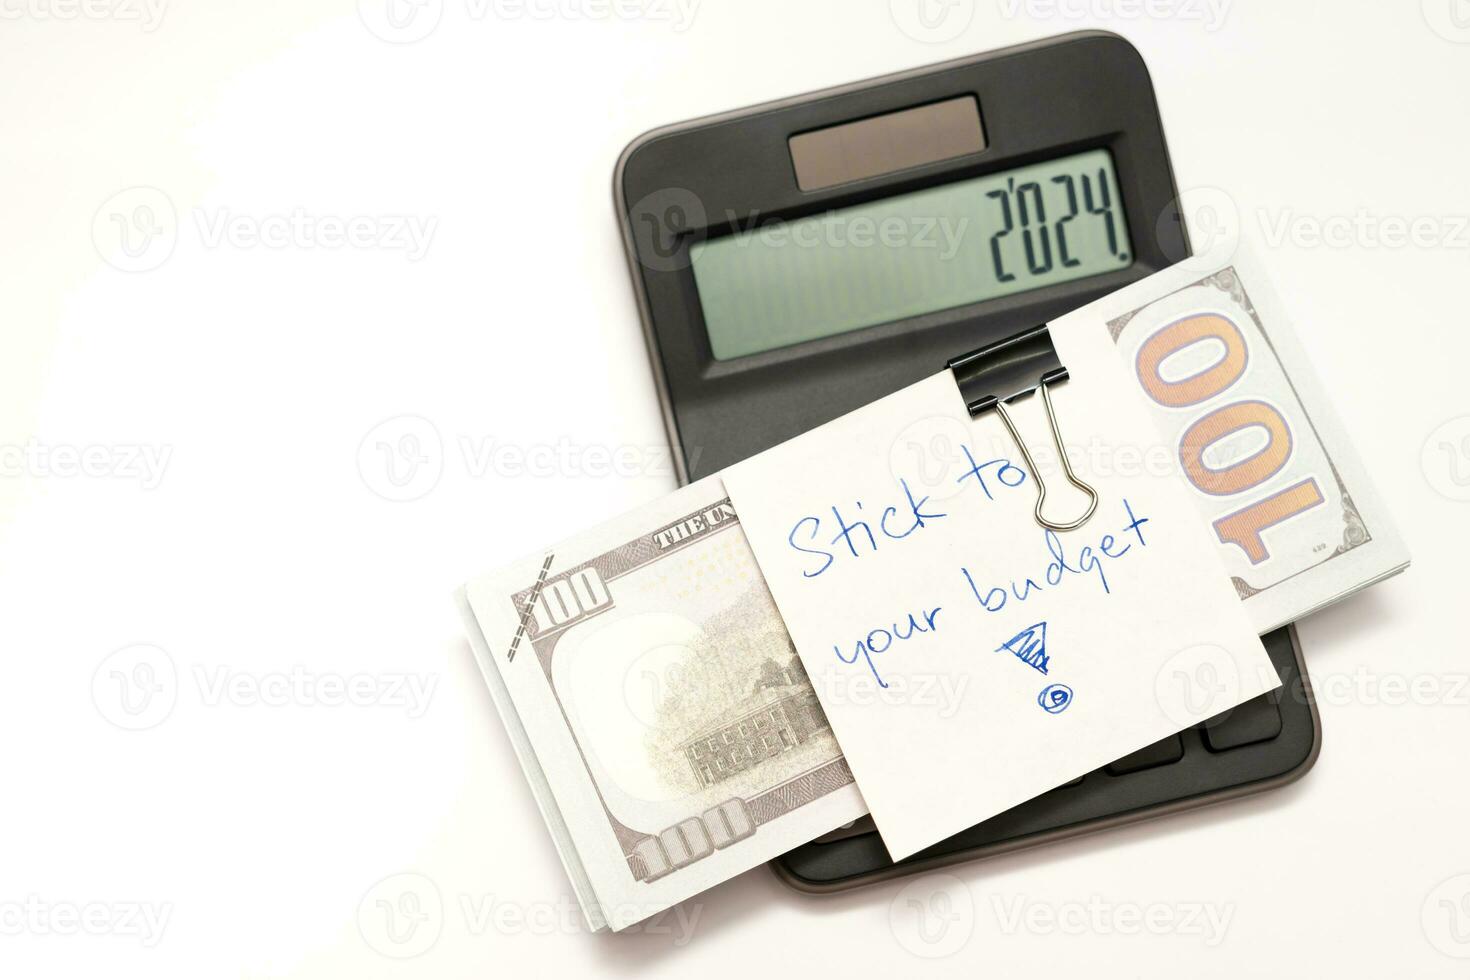 Dollars cash money with text written note STICK TO YOUR BUDGET. concept of financial planning to save money by spending less. Finance and business concept. photo